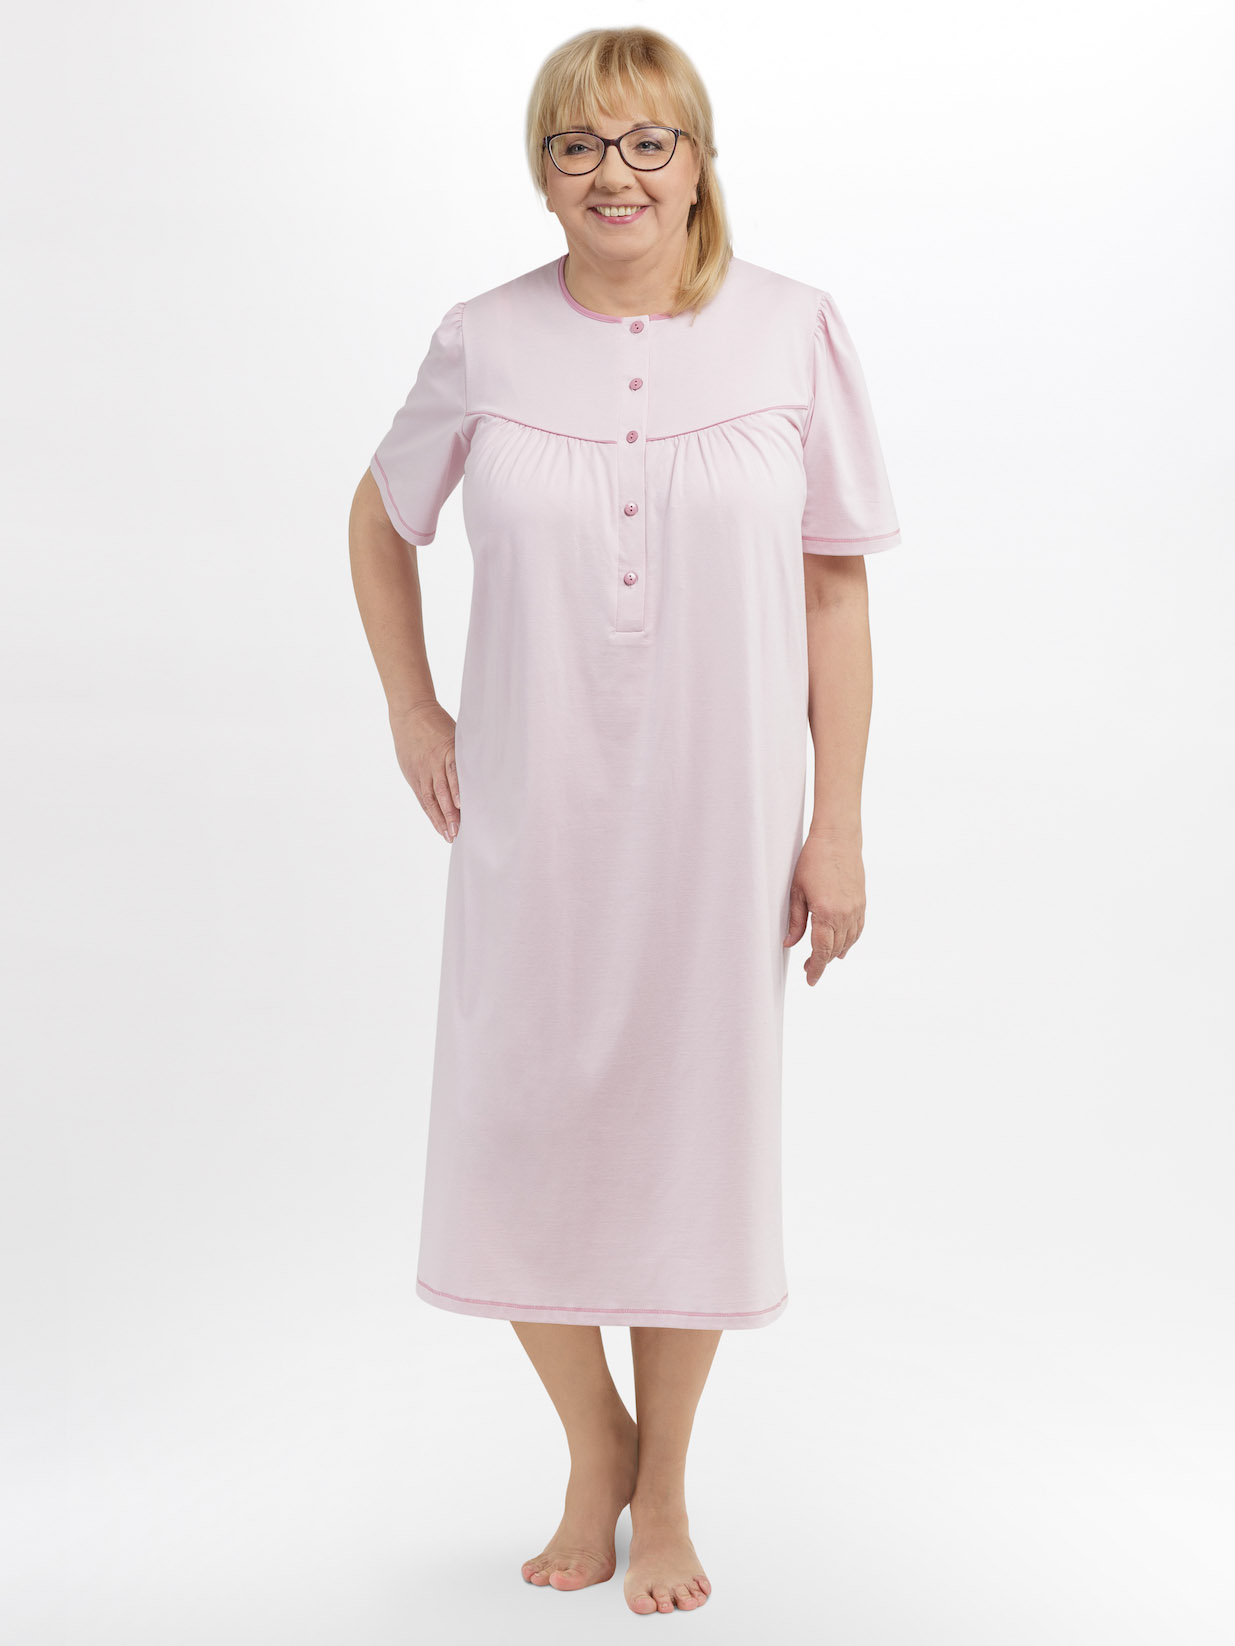 Women's nightgown with buttons on the neckline Martel 221 #2